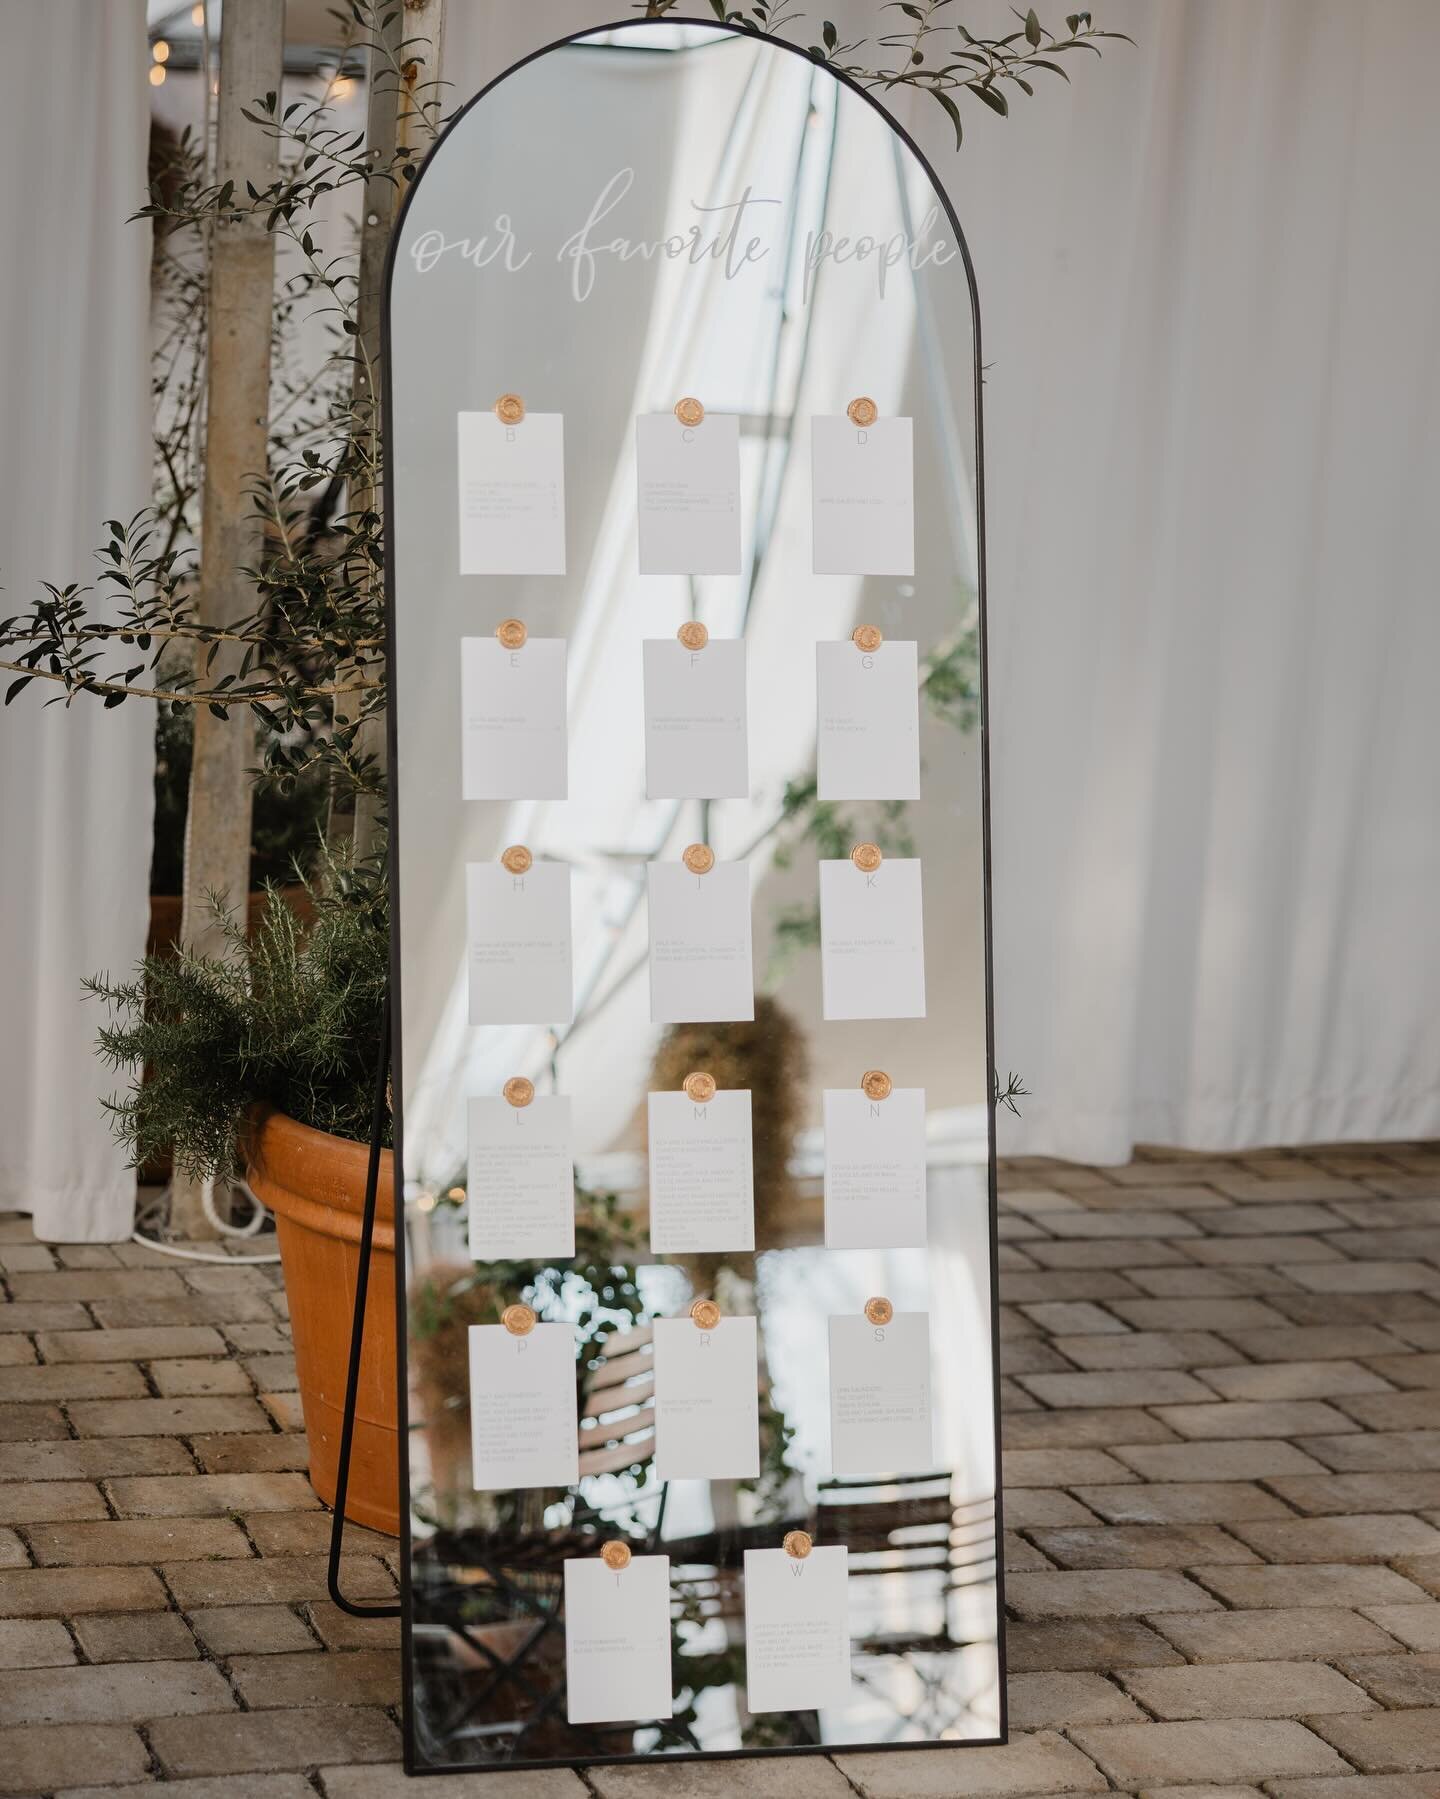 Quite possibly the sweetest wedding I got the honor to be a part of! The amazing vendor team, the amazing couple, everything was perfect!

Photo: @bighillproductions
Venue: @longhollowgardens
Planner: @leighbawcomevents
Signage rentals: @luckyshadows